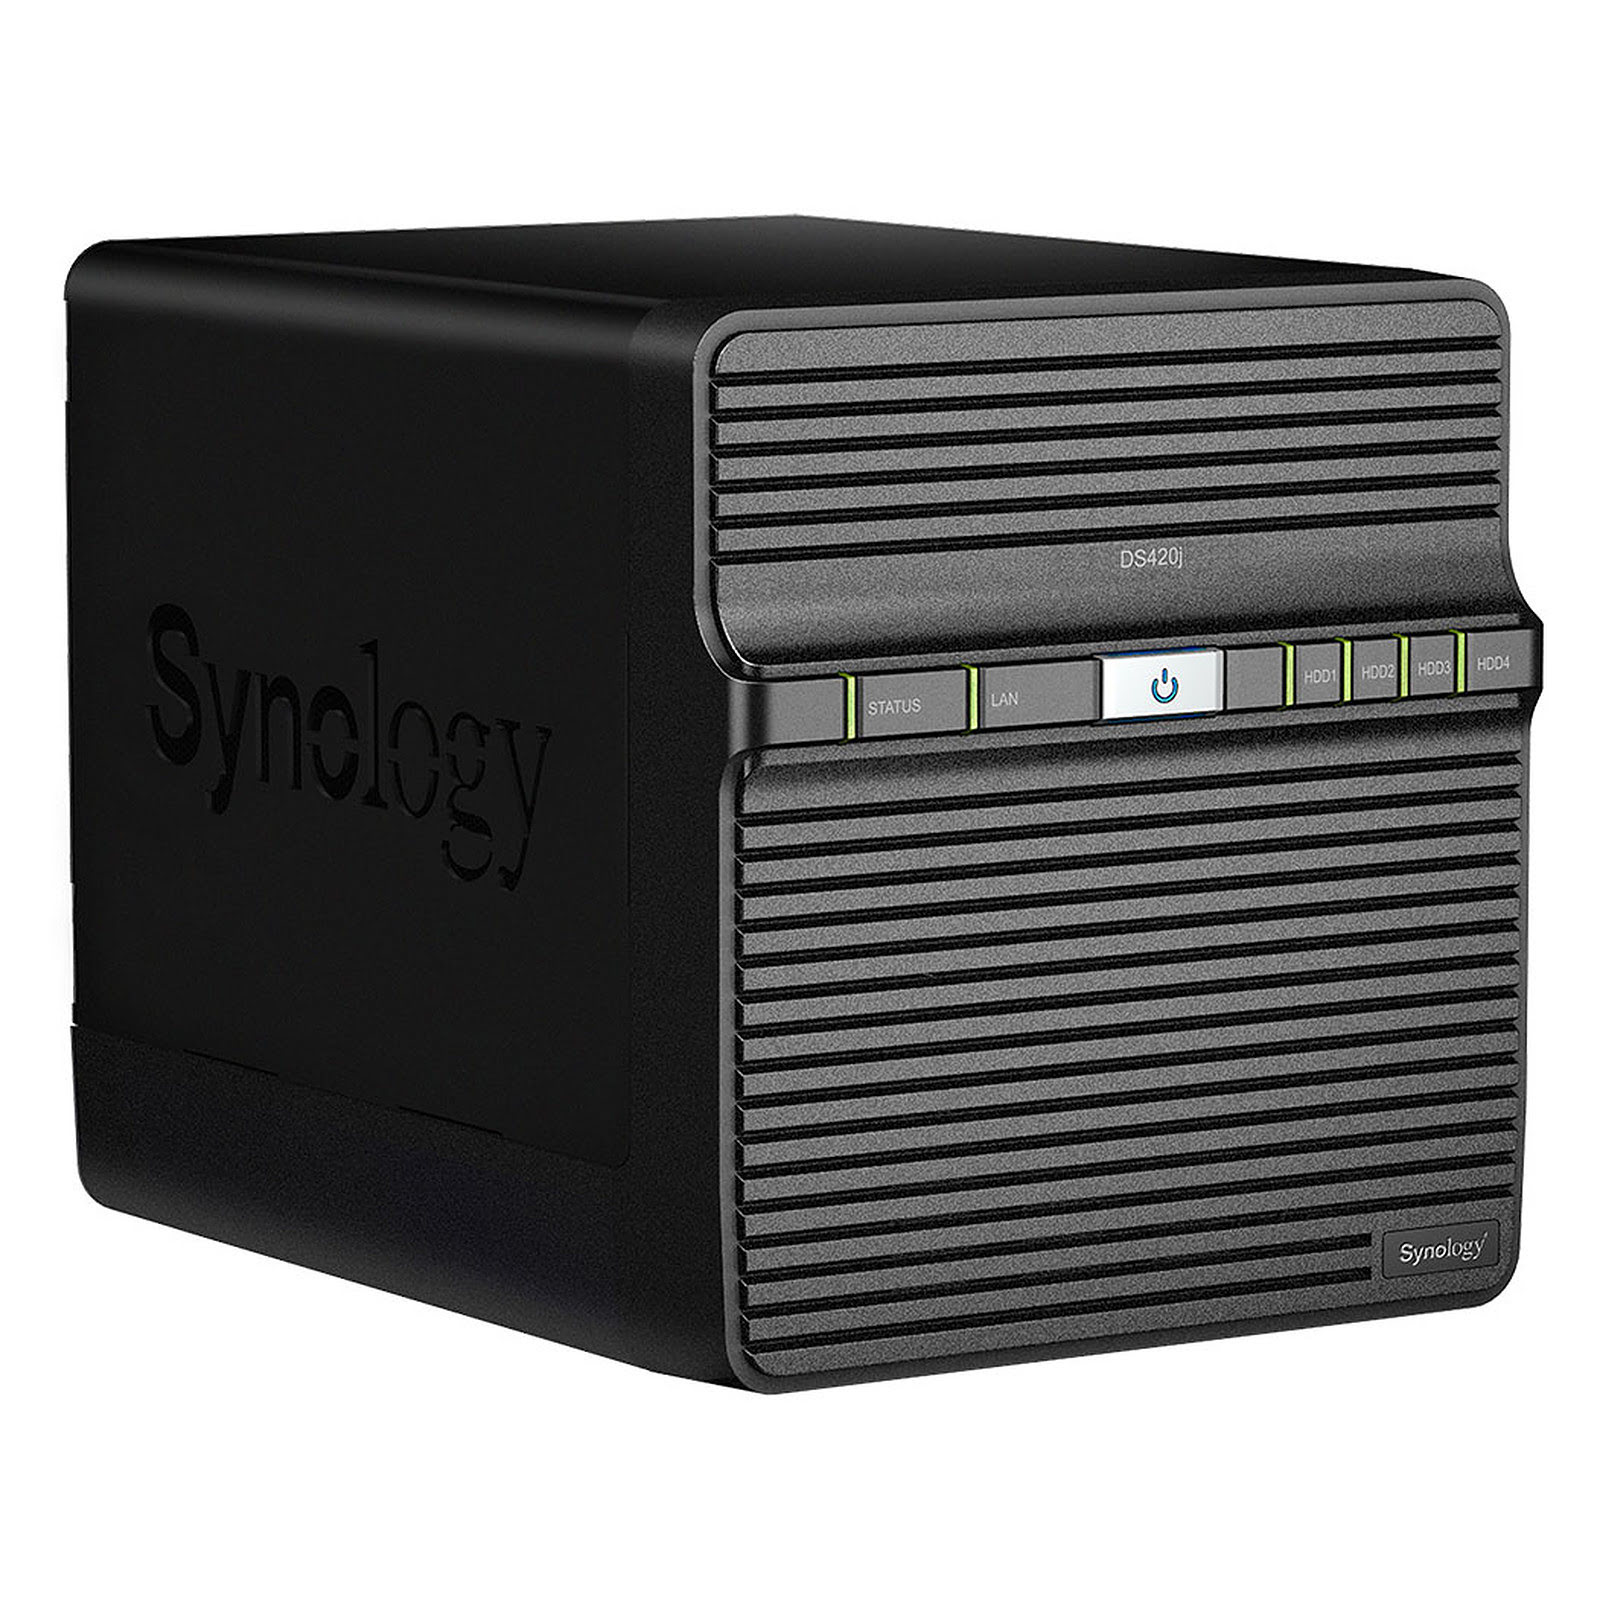 Serveur NAS Synology DS420J - 4 Baies